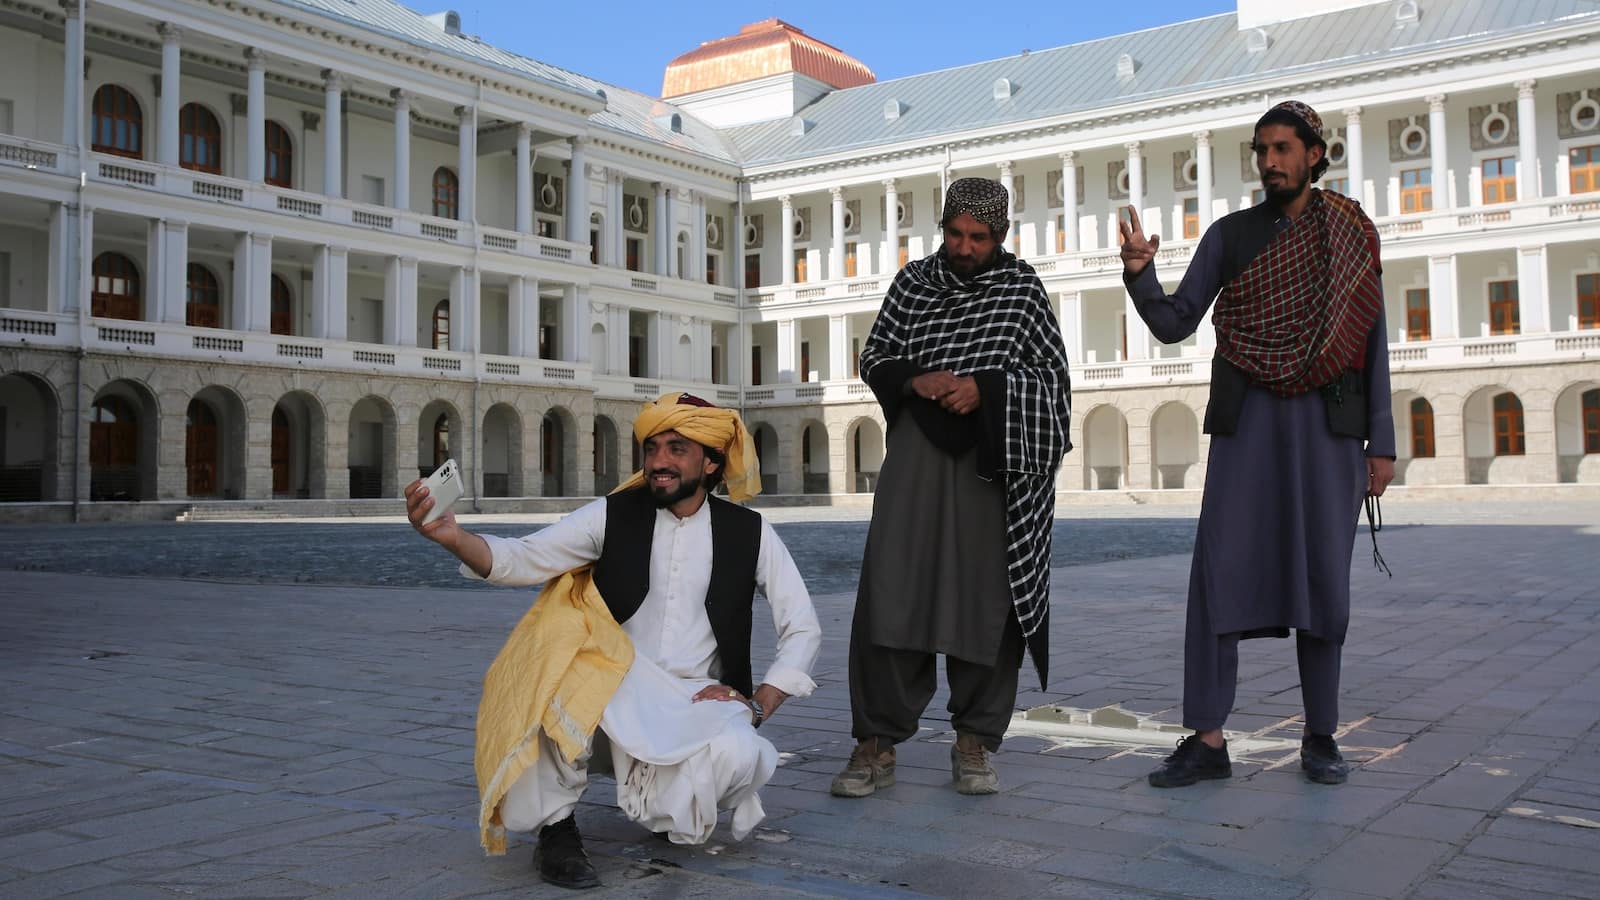 From spring offensive to charm offensive: The Taliban are working to woo tourists to Afghanistan